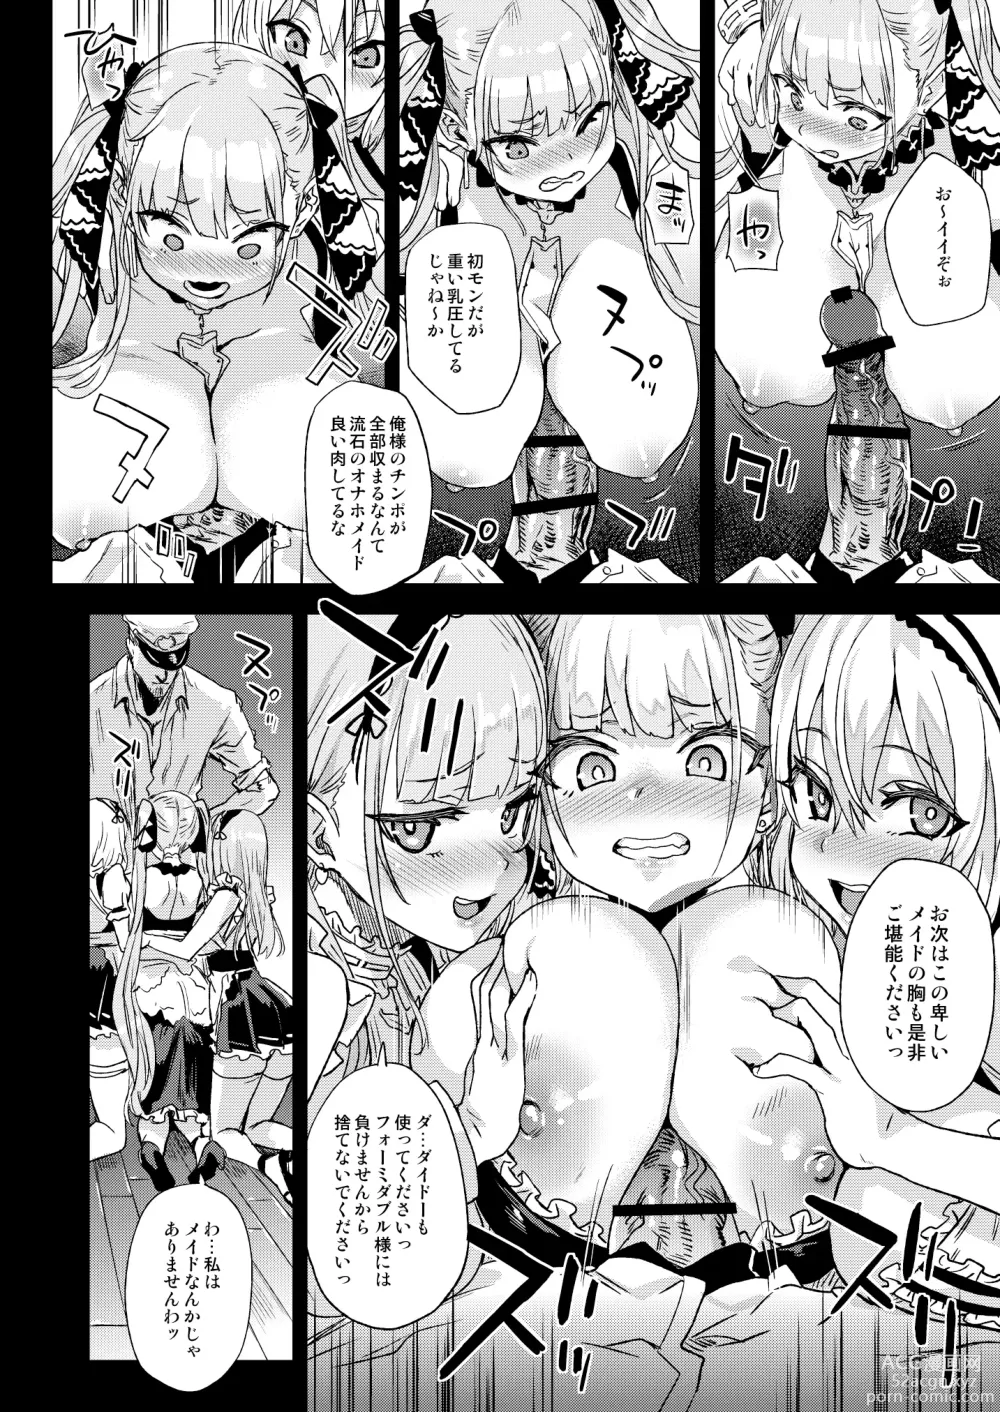 Page 6 of doujinshi Lady falls into a maid